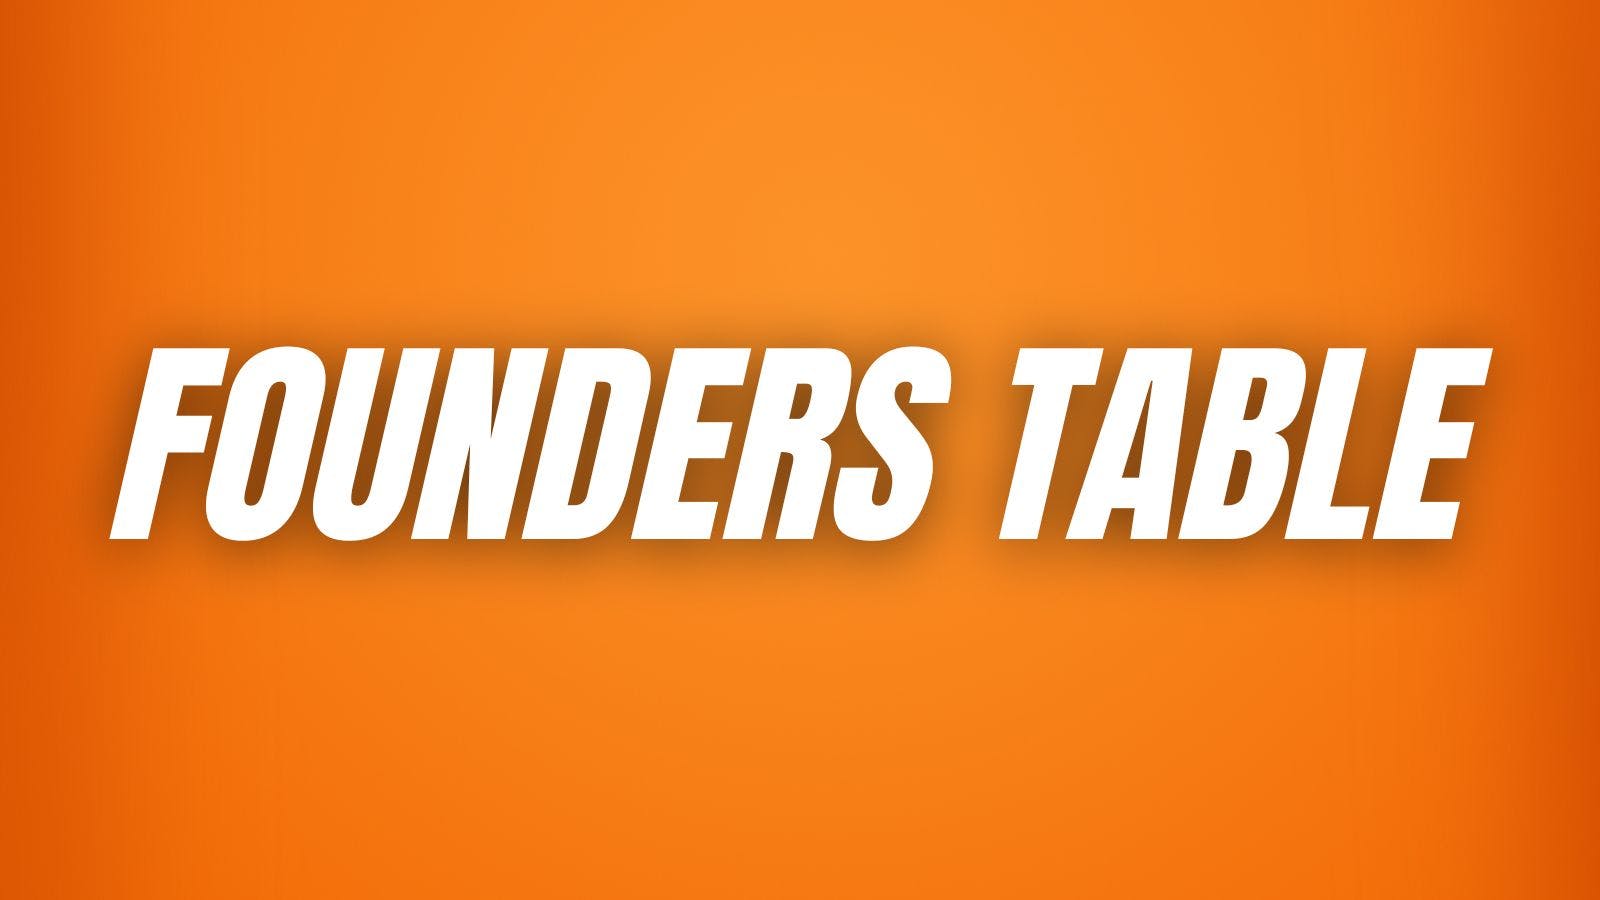 Amsterdam Founders Table: A fun networking dinner for entrepreneurs